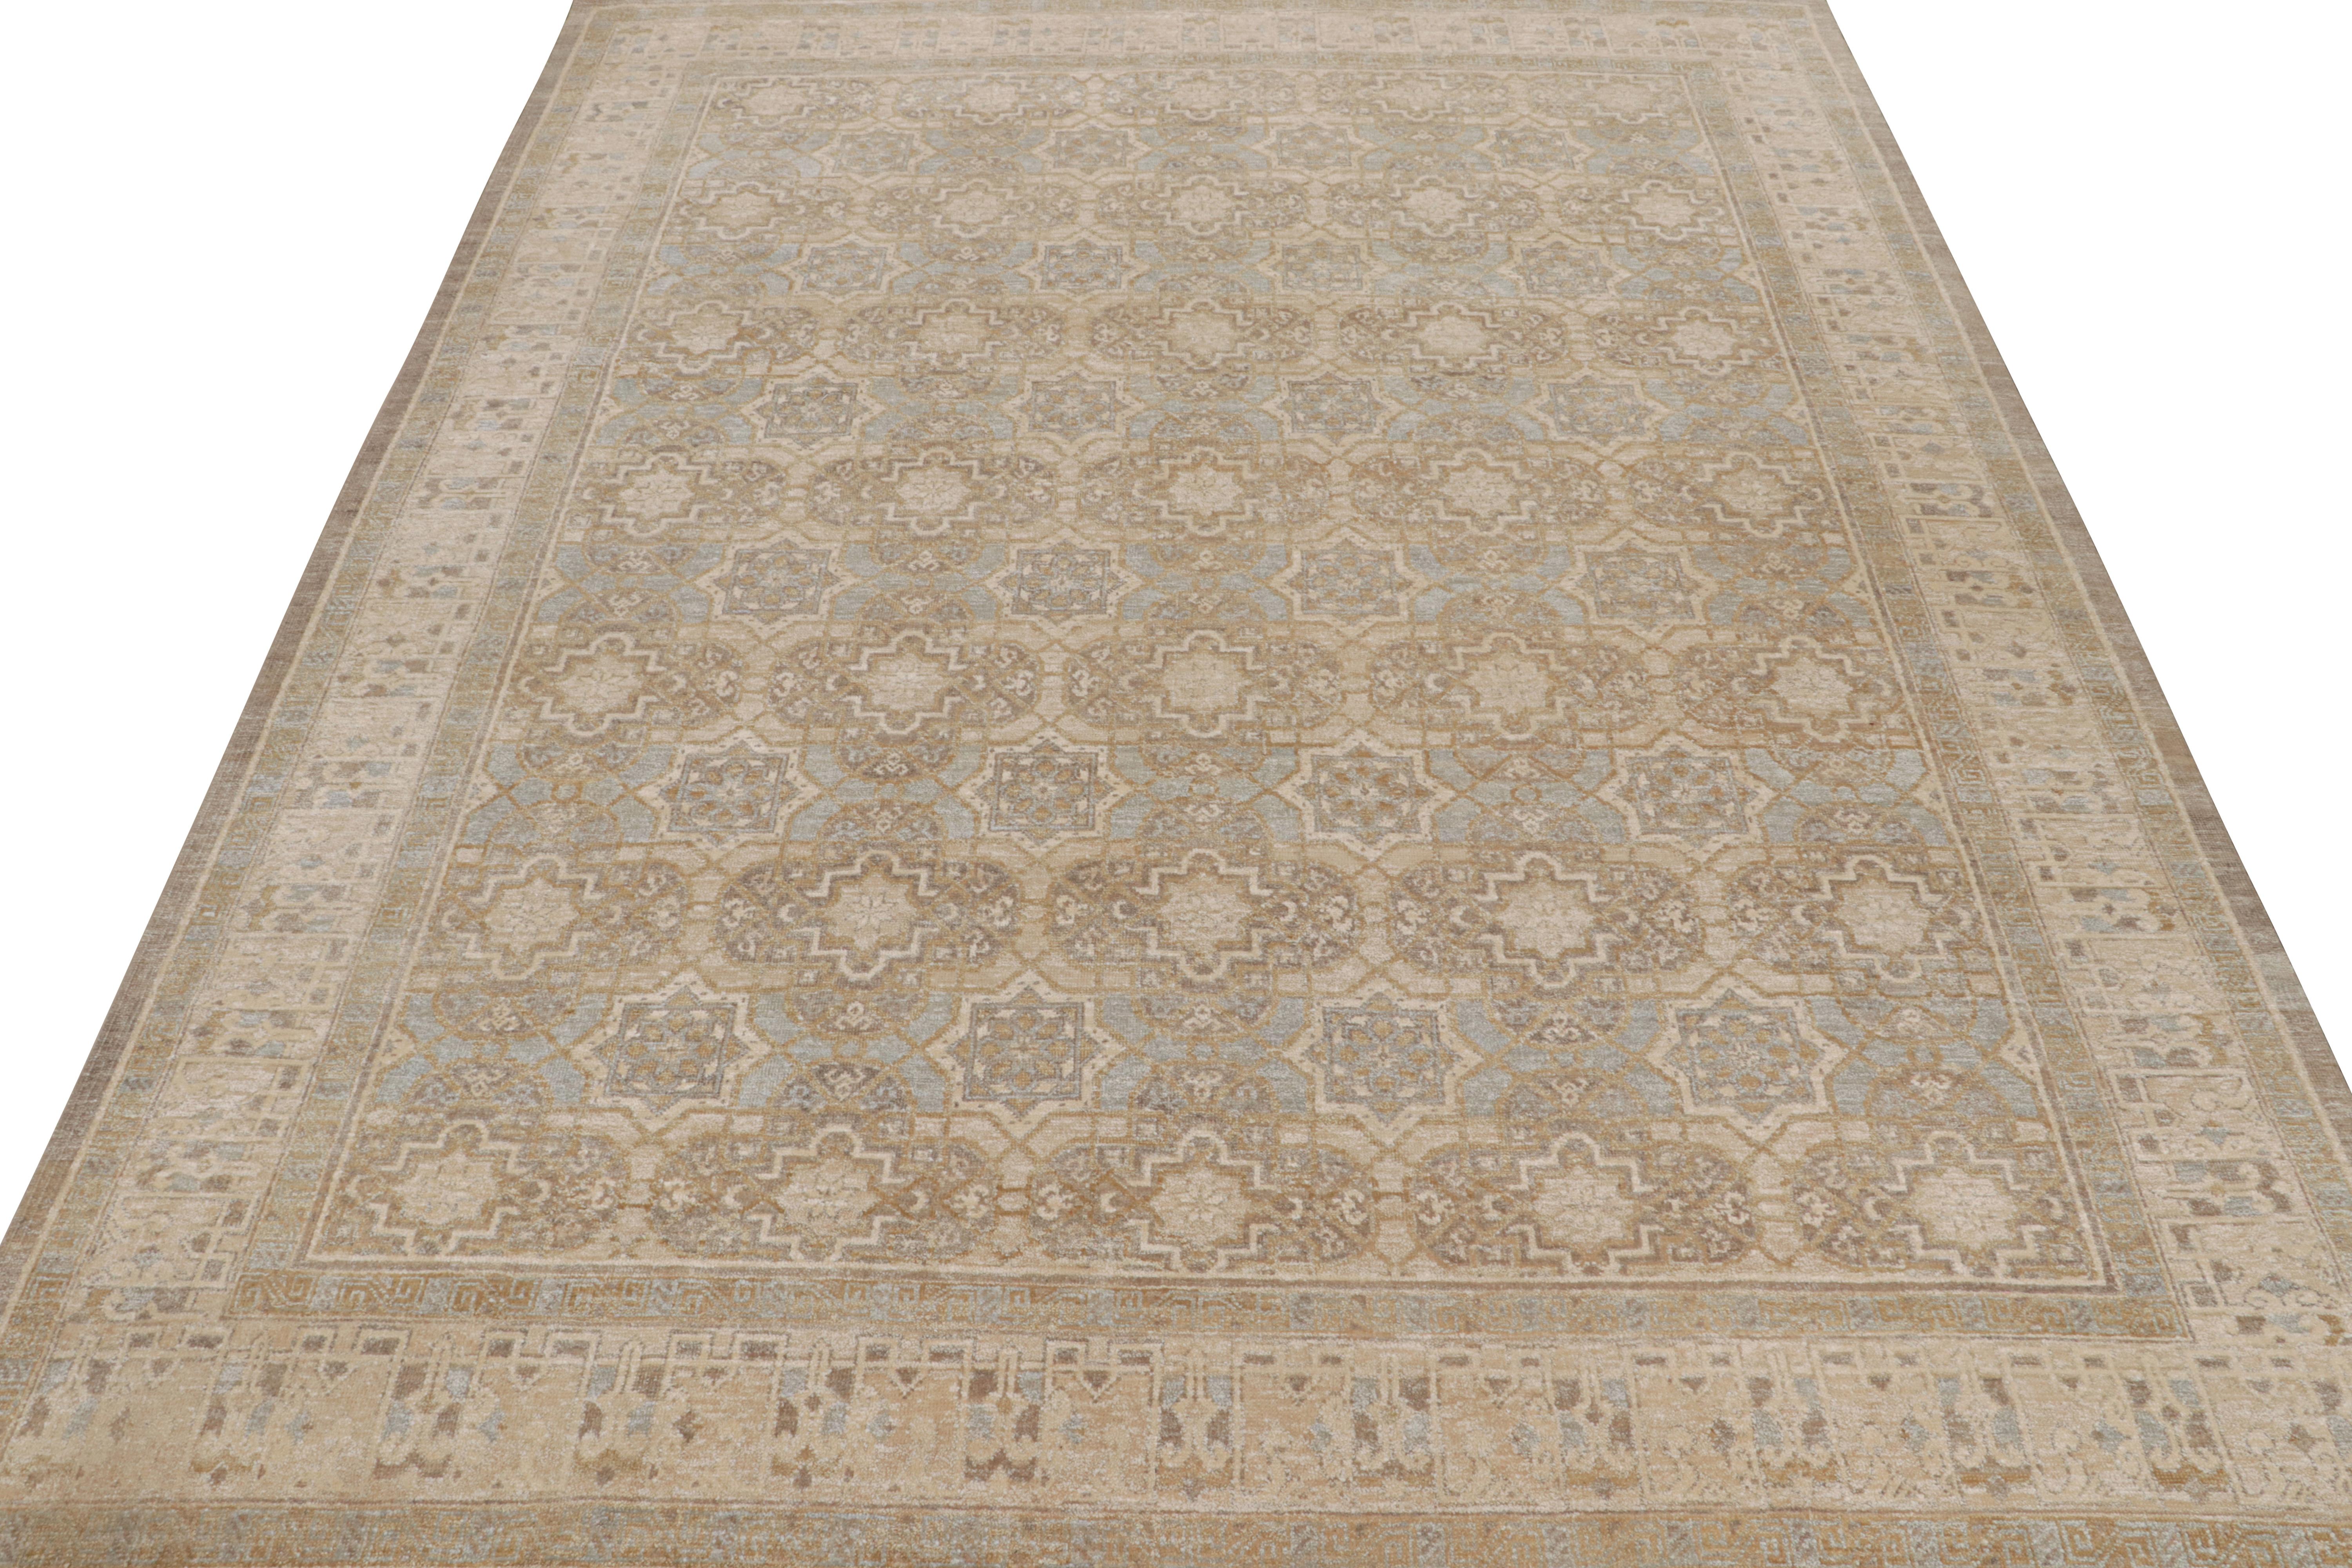 Indian Rug & Kilim’s Oushak Style Oversized Rug in Taupe with Floral Patterns For Sale